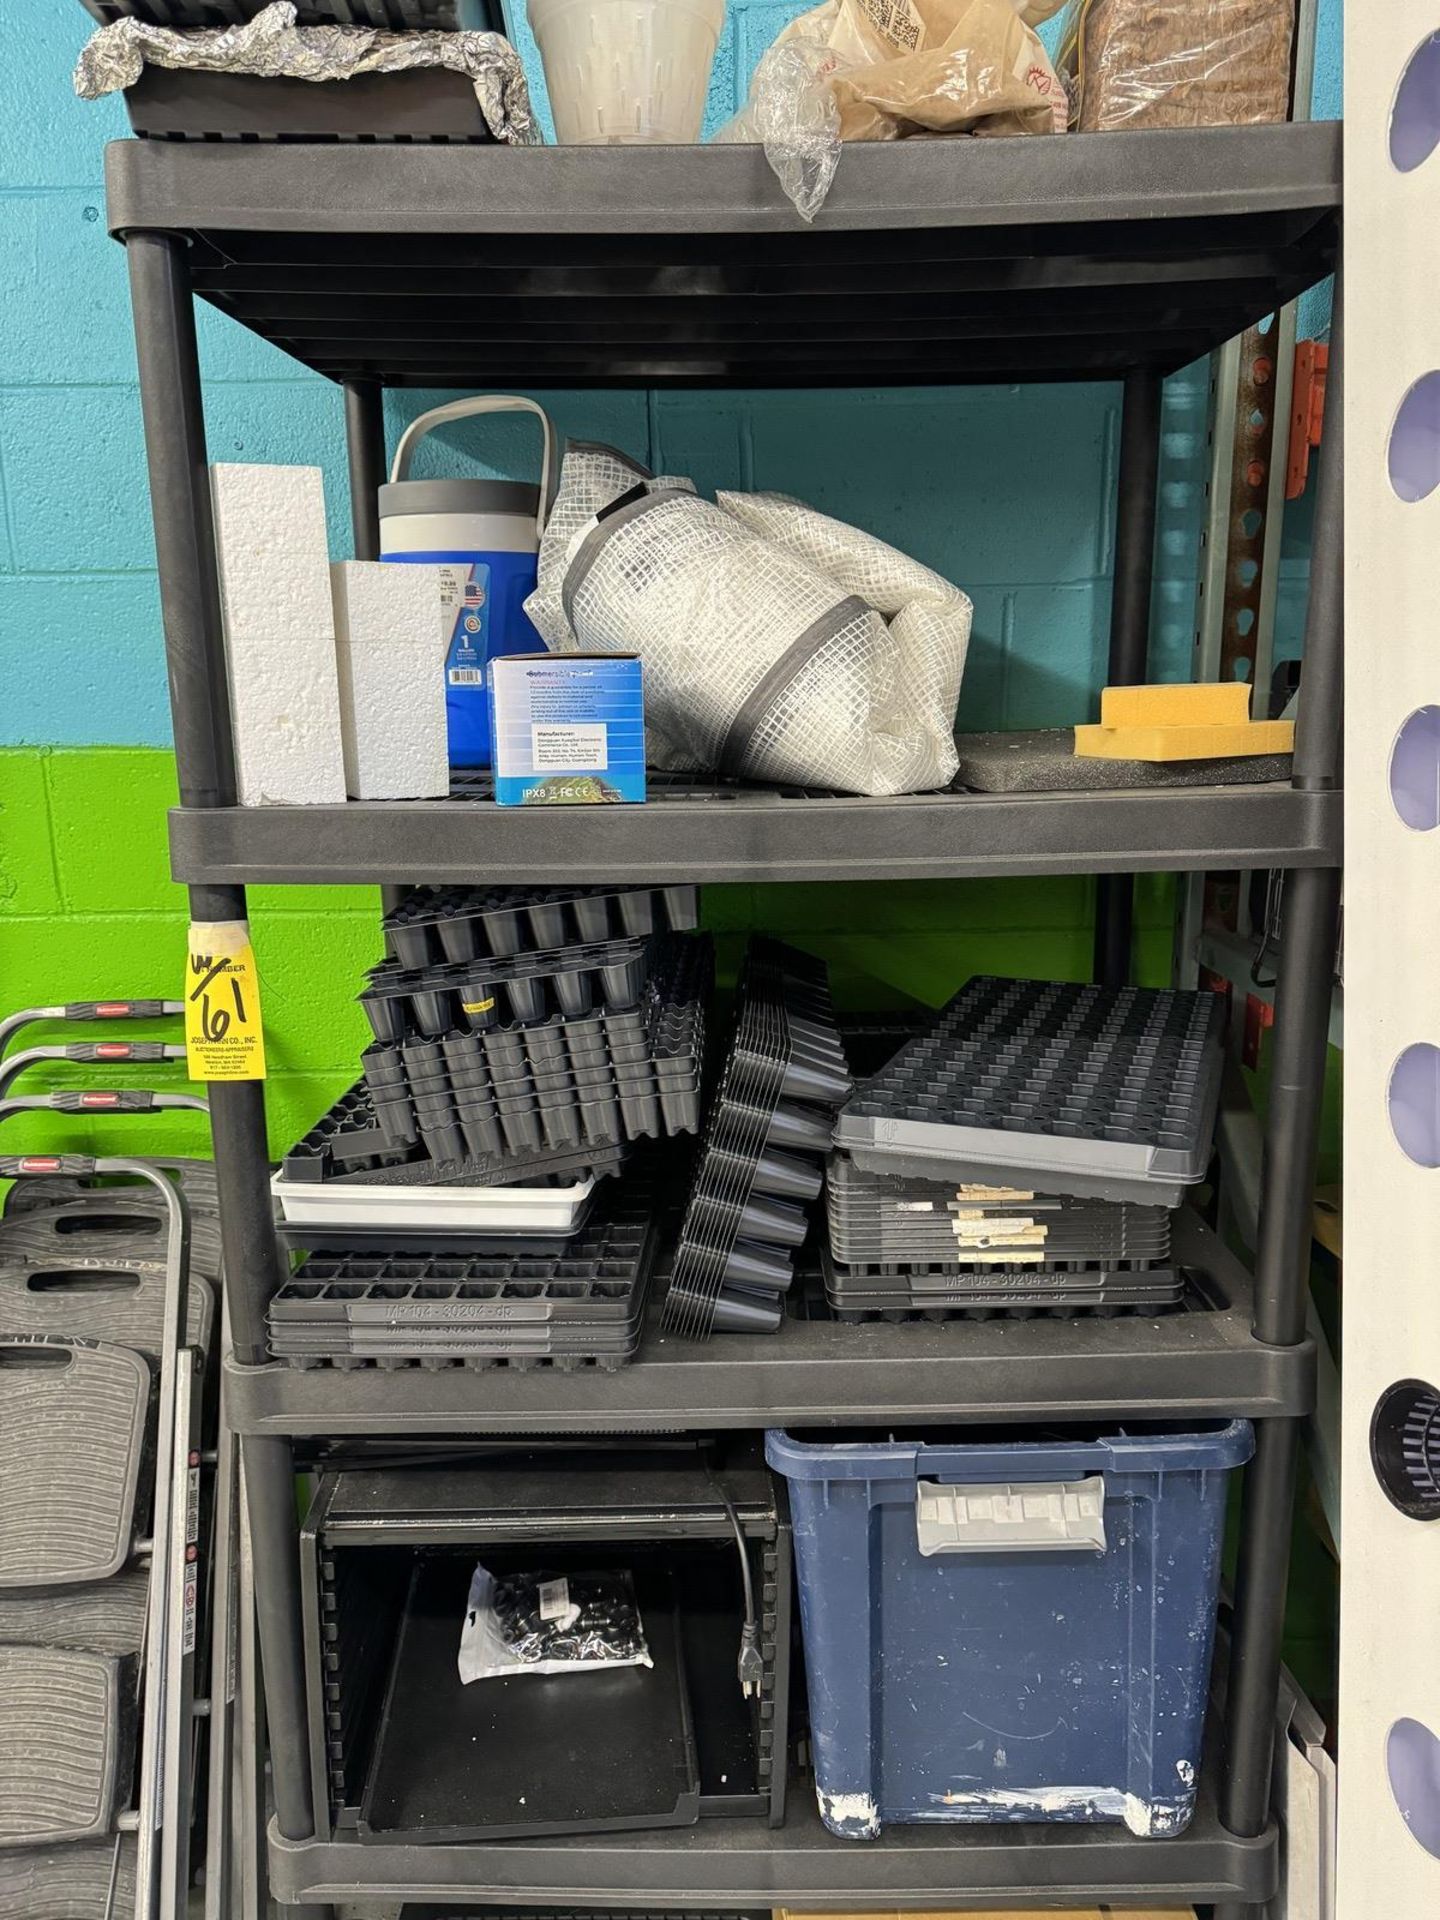 Lot Blue Port. 2 Shelf Cart with Vent Covers, Plastic Trays, Filters, Etc. - Image 4 of 4